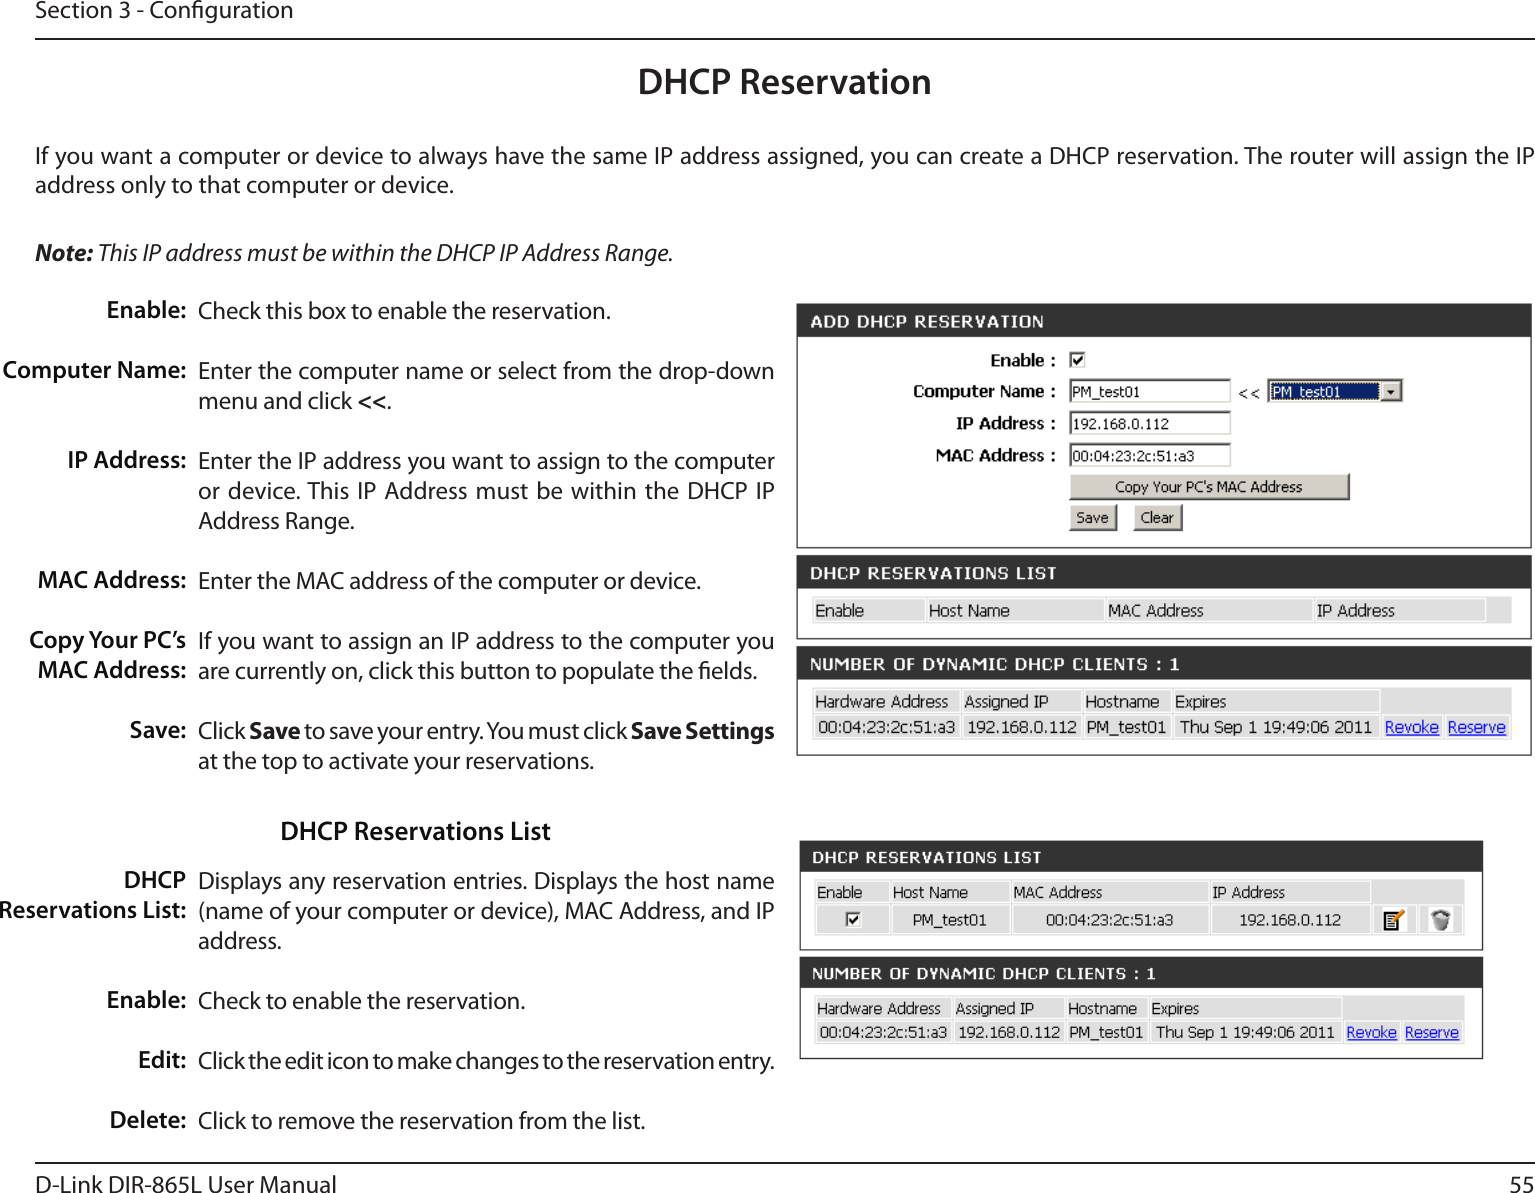 55D-Link DIR-865L User ManualSection 3 - CongurationDHCP ReservationIf you want a computer or device to always have the same IP address assigned, you can create a DHCP reservation. The router will assign the IP address only to that computer or device. Note: This IP address must be within the DHCP IP Address Range.Check this box to enable the reservation.Enter the computer name or select from the drop-down menu and click &lt;&lt;.Enter the IP address you want to assign to the computer or device. This IP Address must be within the  DHCP IP Address Range.Enter the MAC address of the computer or device.If you want to assign an IP address to the computer you are currently on, click this button to populate the elds. Click Save to save your entry. You must click Save Settings at the top to activate your reservations. Displays any reservation entries. Displays the host name (name of your computer or device), MAC Address, and IP address.Check to enable the reservation.Click the edit icon to make changes to the reservation entry.Click to remove the reservation from the list.Enable:Computer Name:IP Address:MAC Address:Copy Your PC’s MAC Address:Save:DHCP Reservations List:Enable:Edit:Delete:DHCP Reservations List